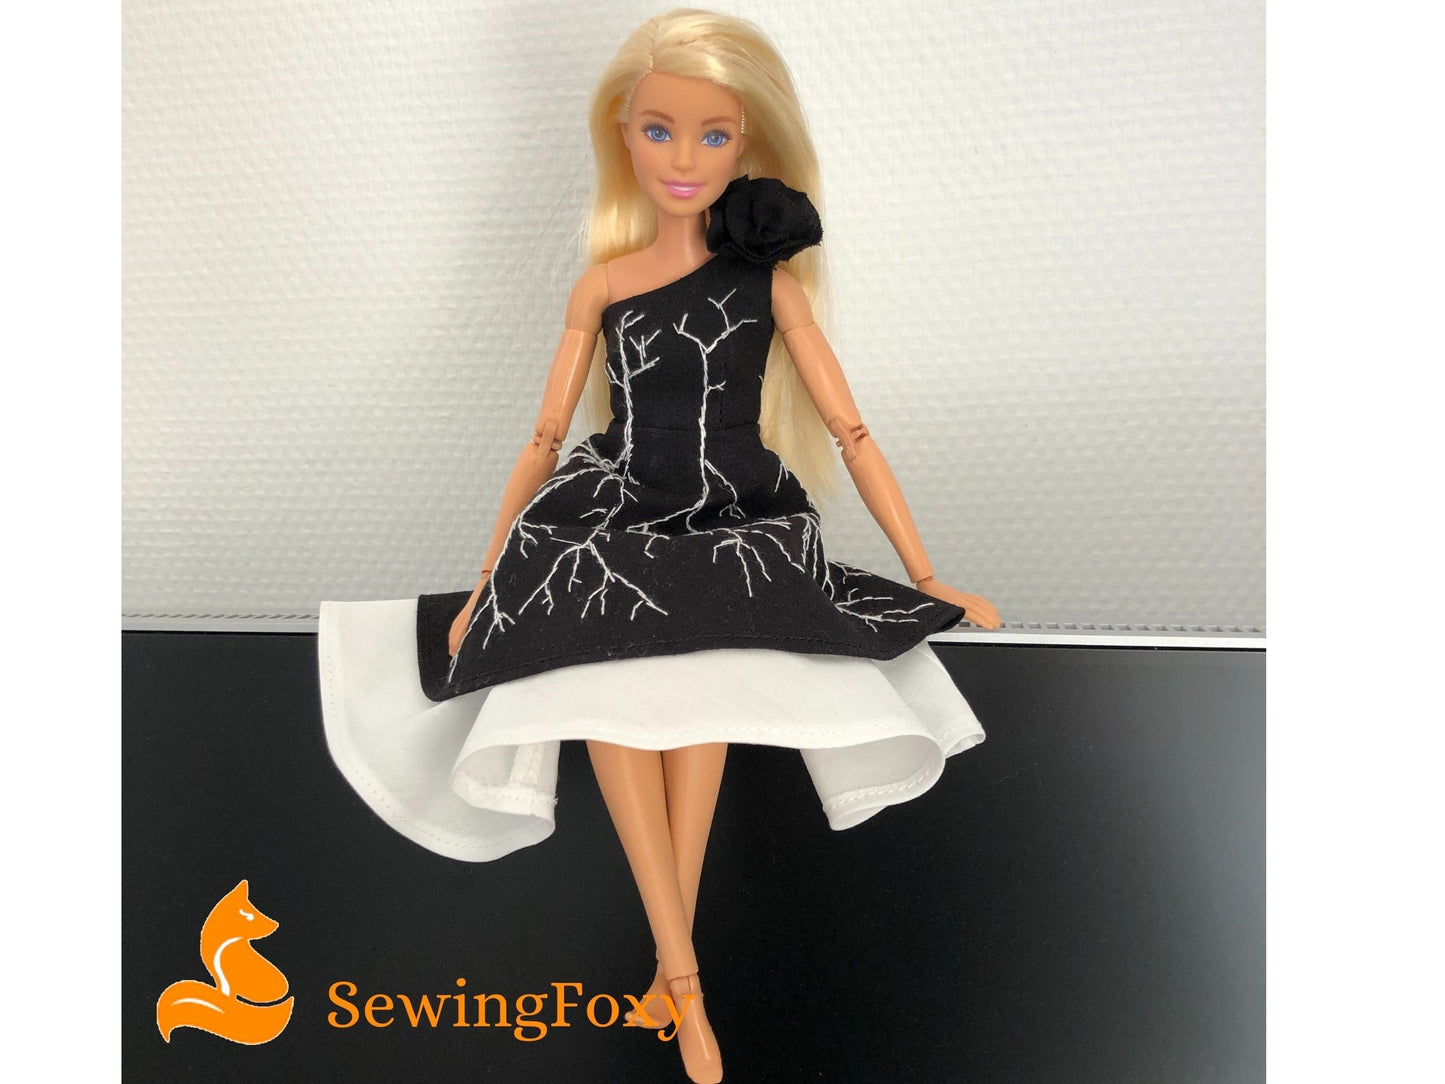 Stitch up a chic satin dress with a bow for the 13 inch My First Barbie,  using my free patterns! #Dolls #Barbie - Free Doll Clothes Patterns